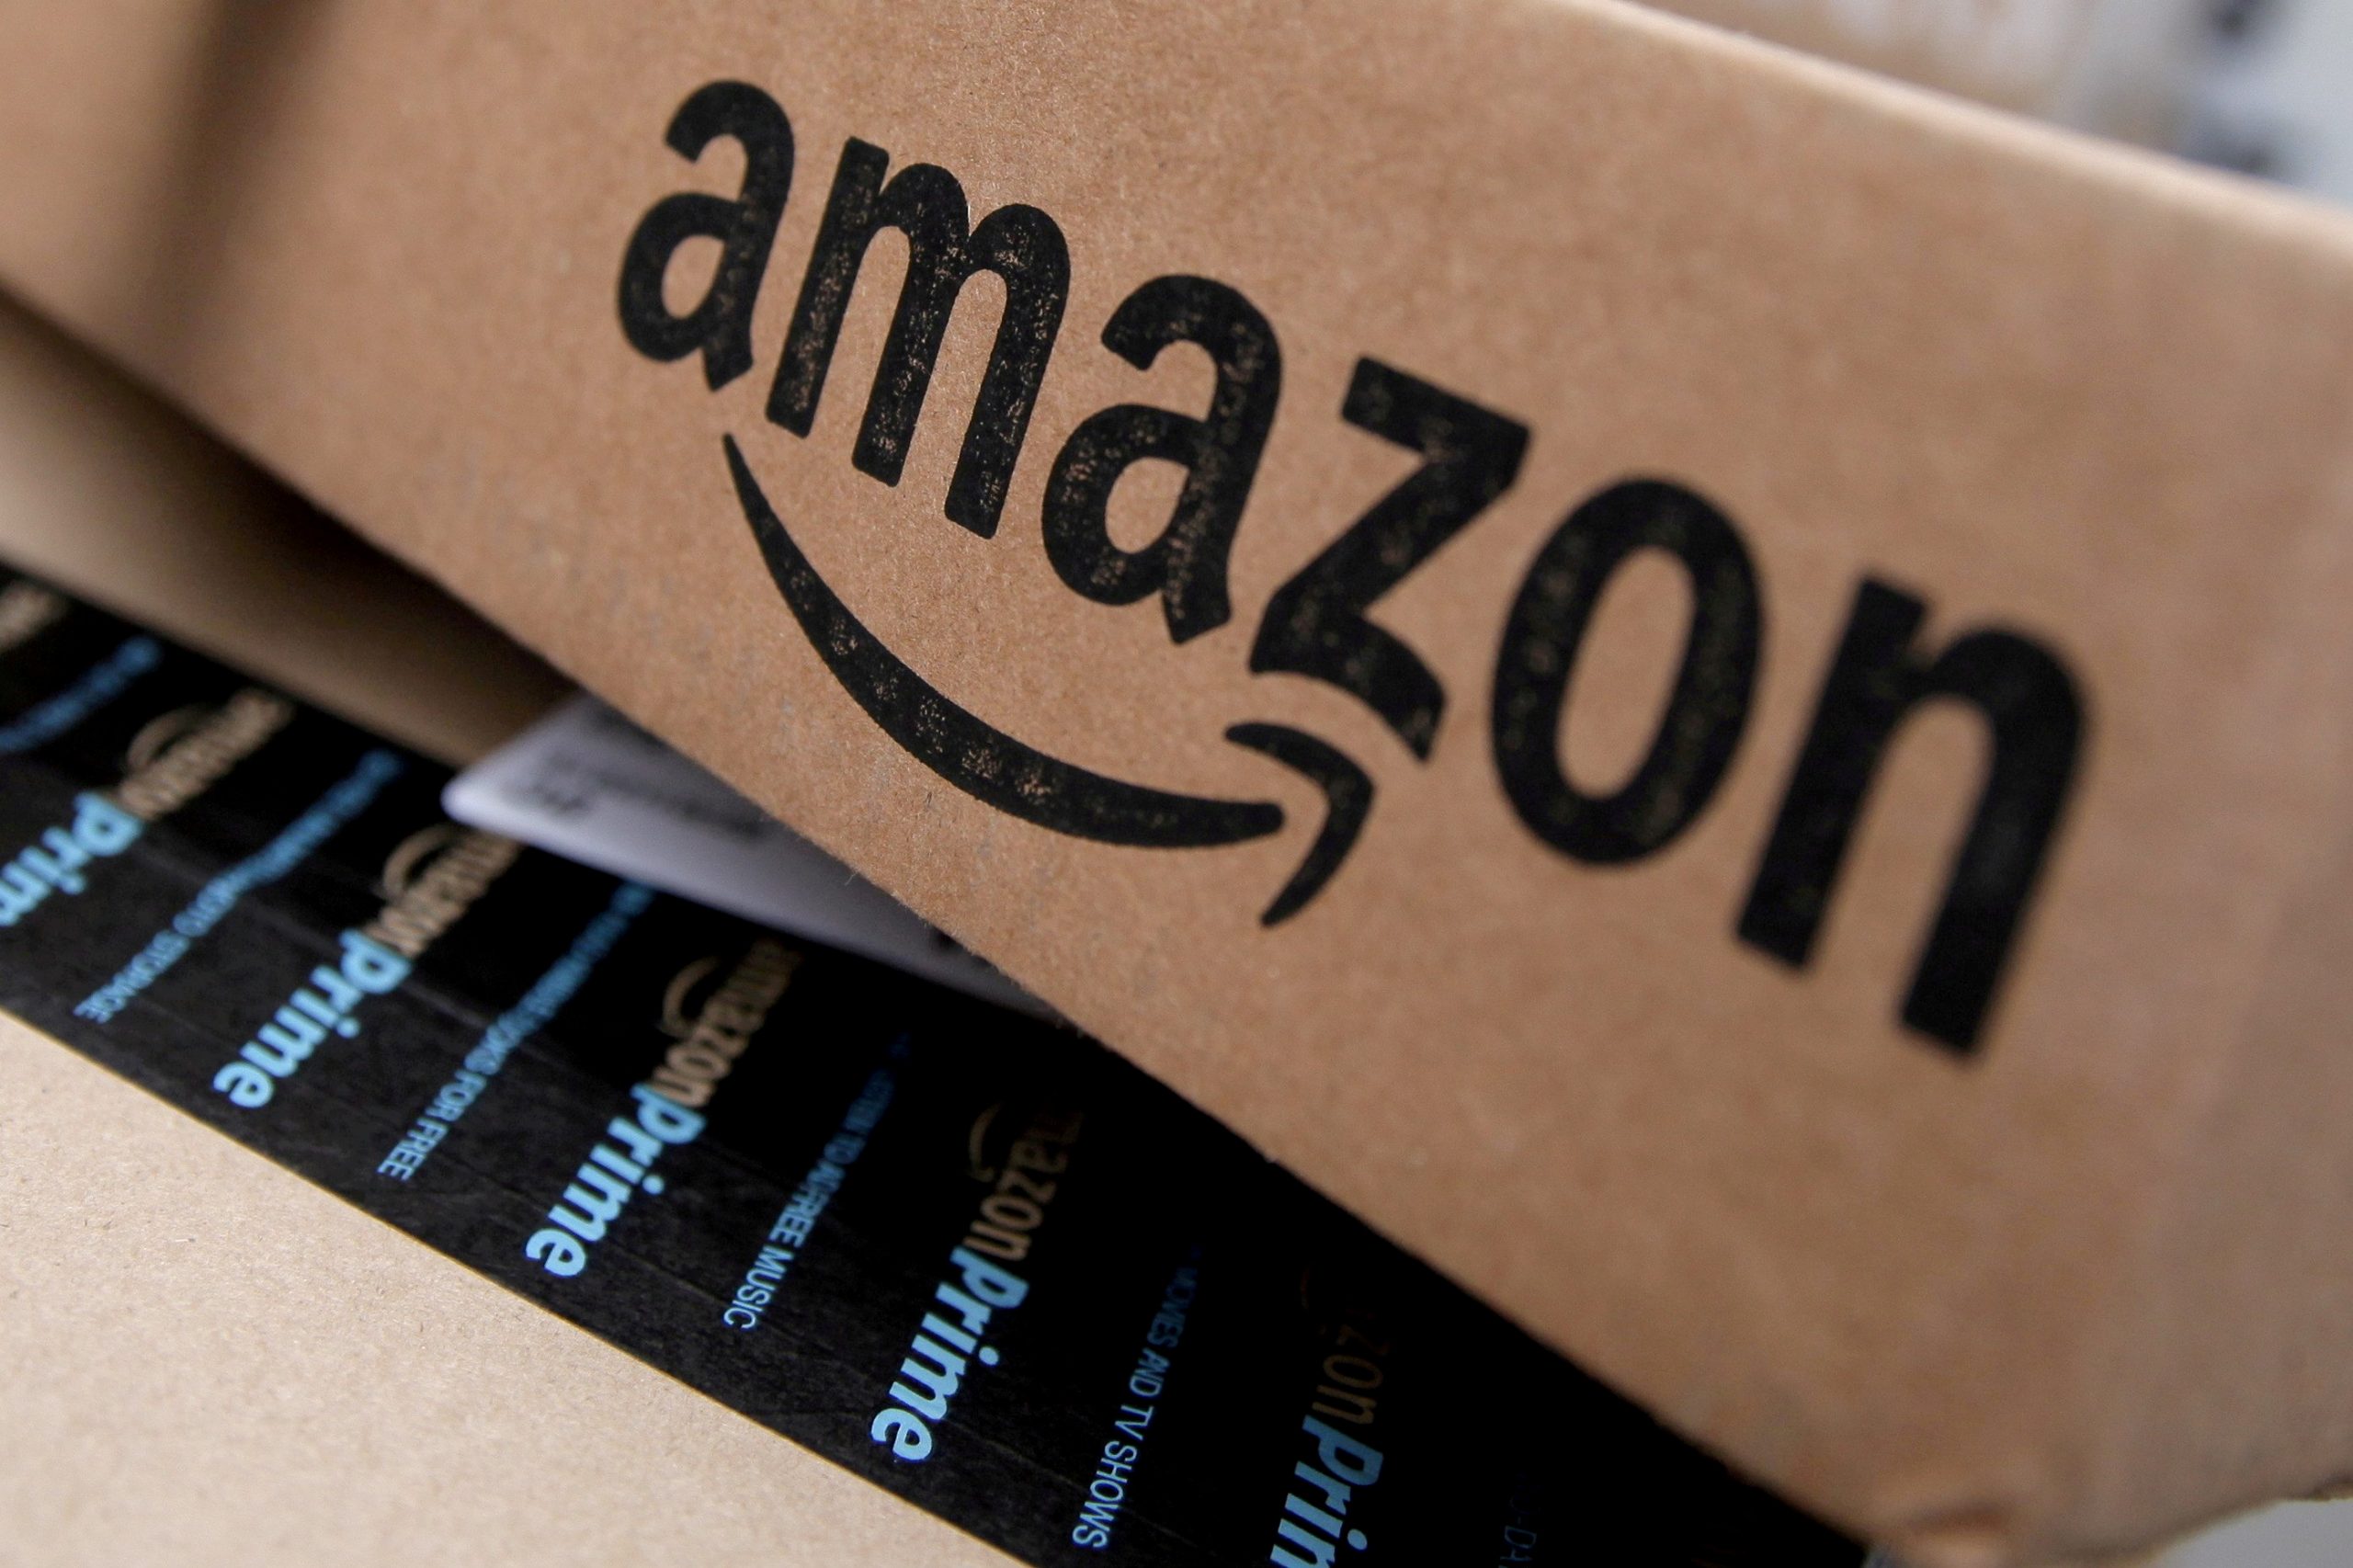  Amazon delays office return until January as COVID-19 cases surge